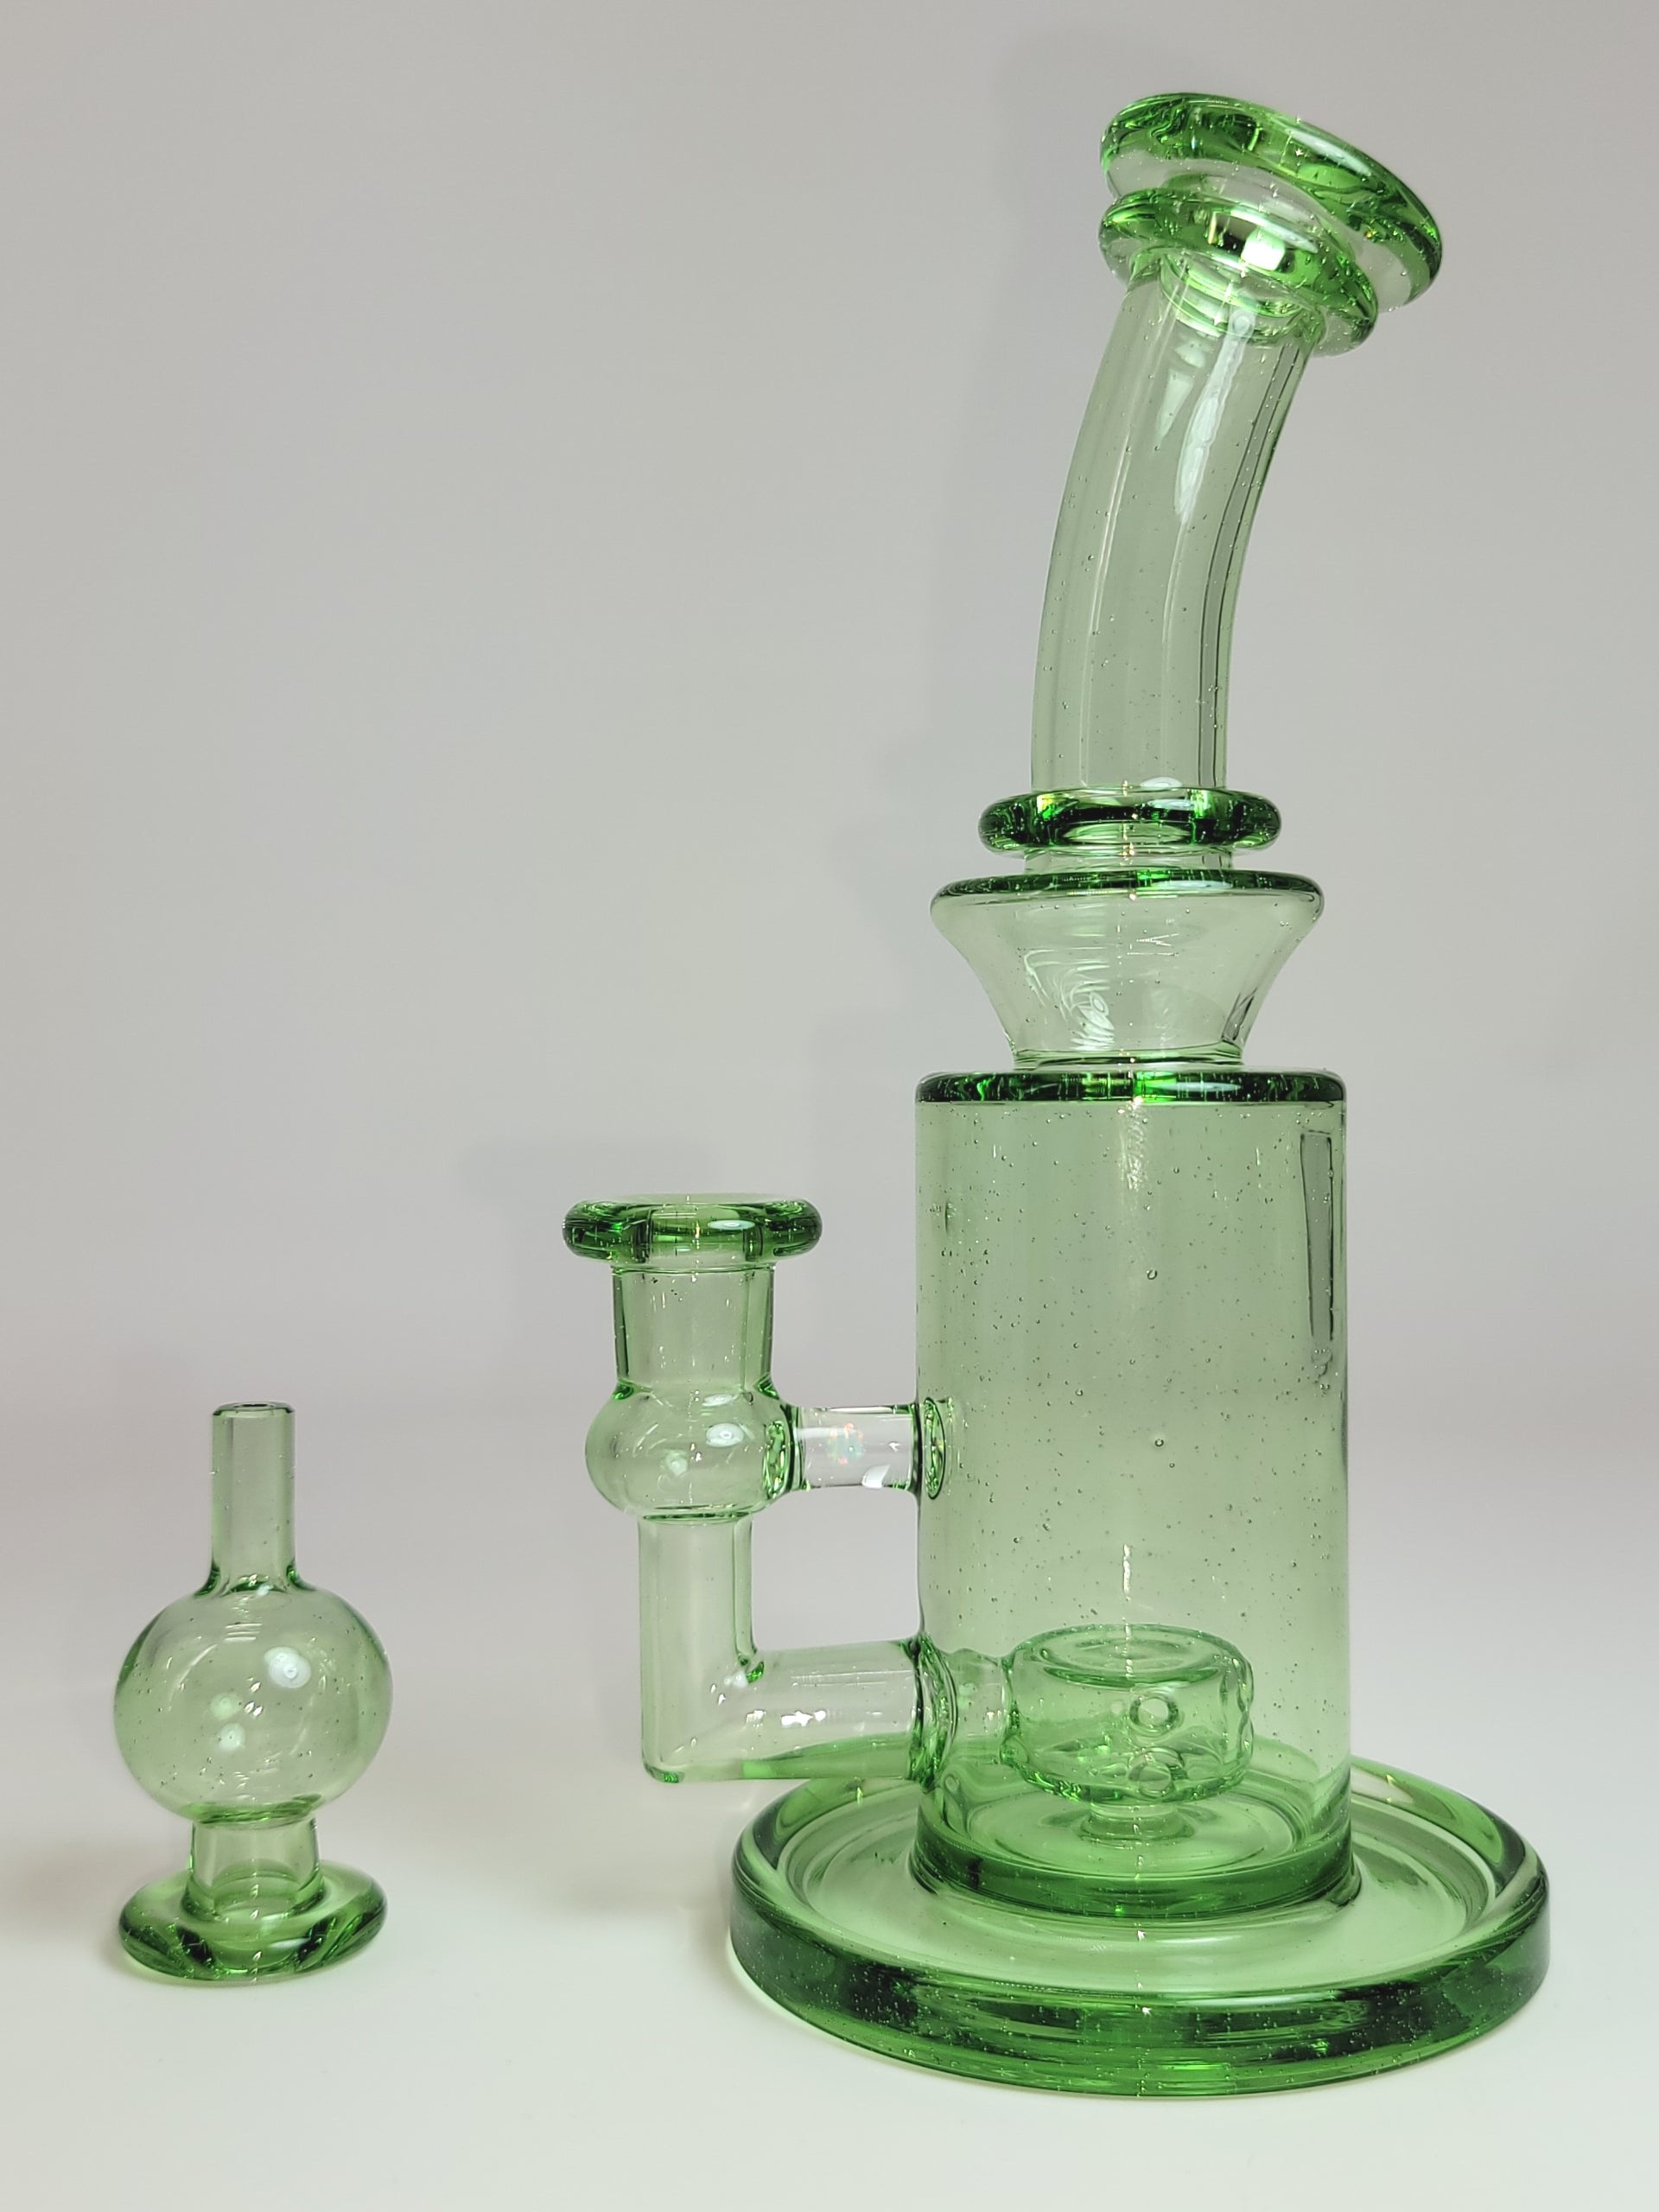 Eric Law 6 hole rig with opal in kryptonite